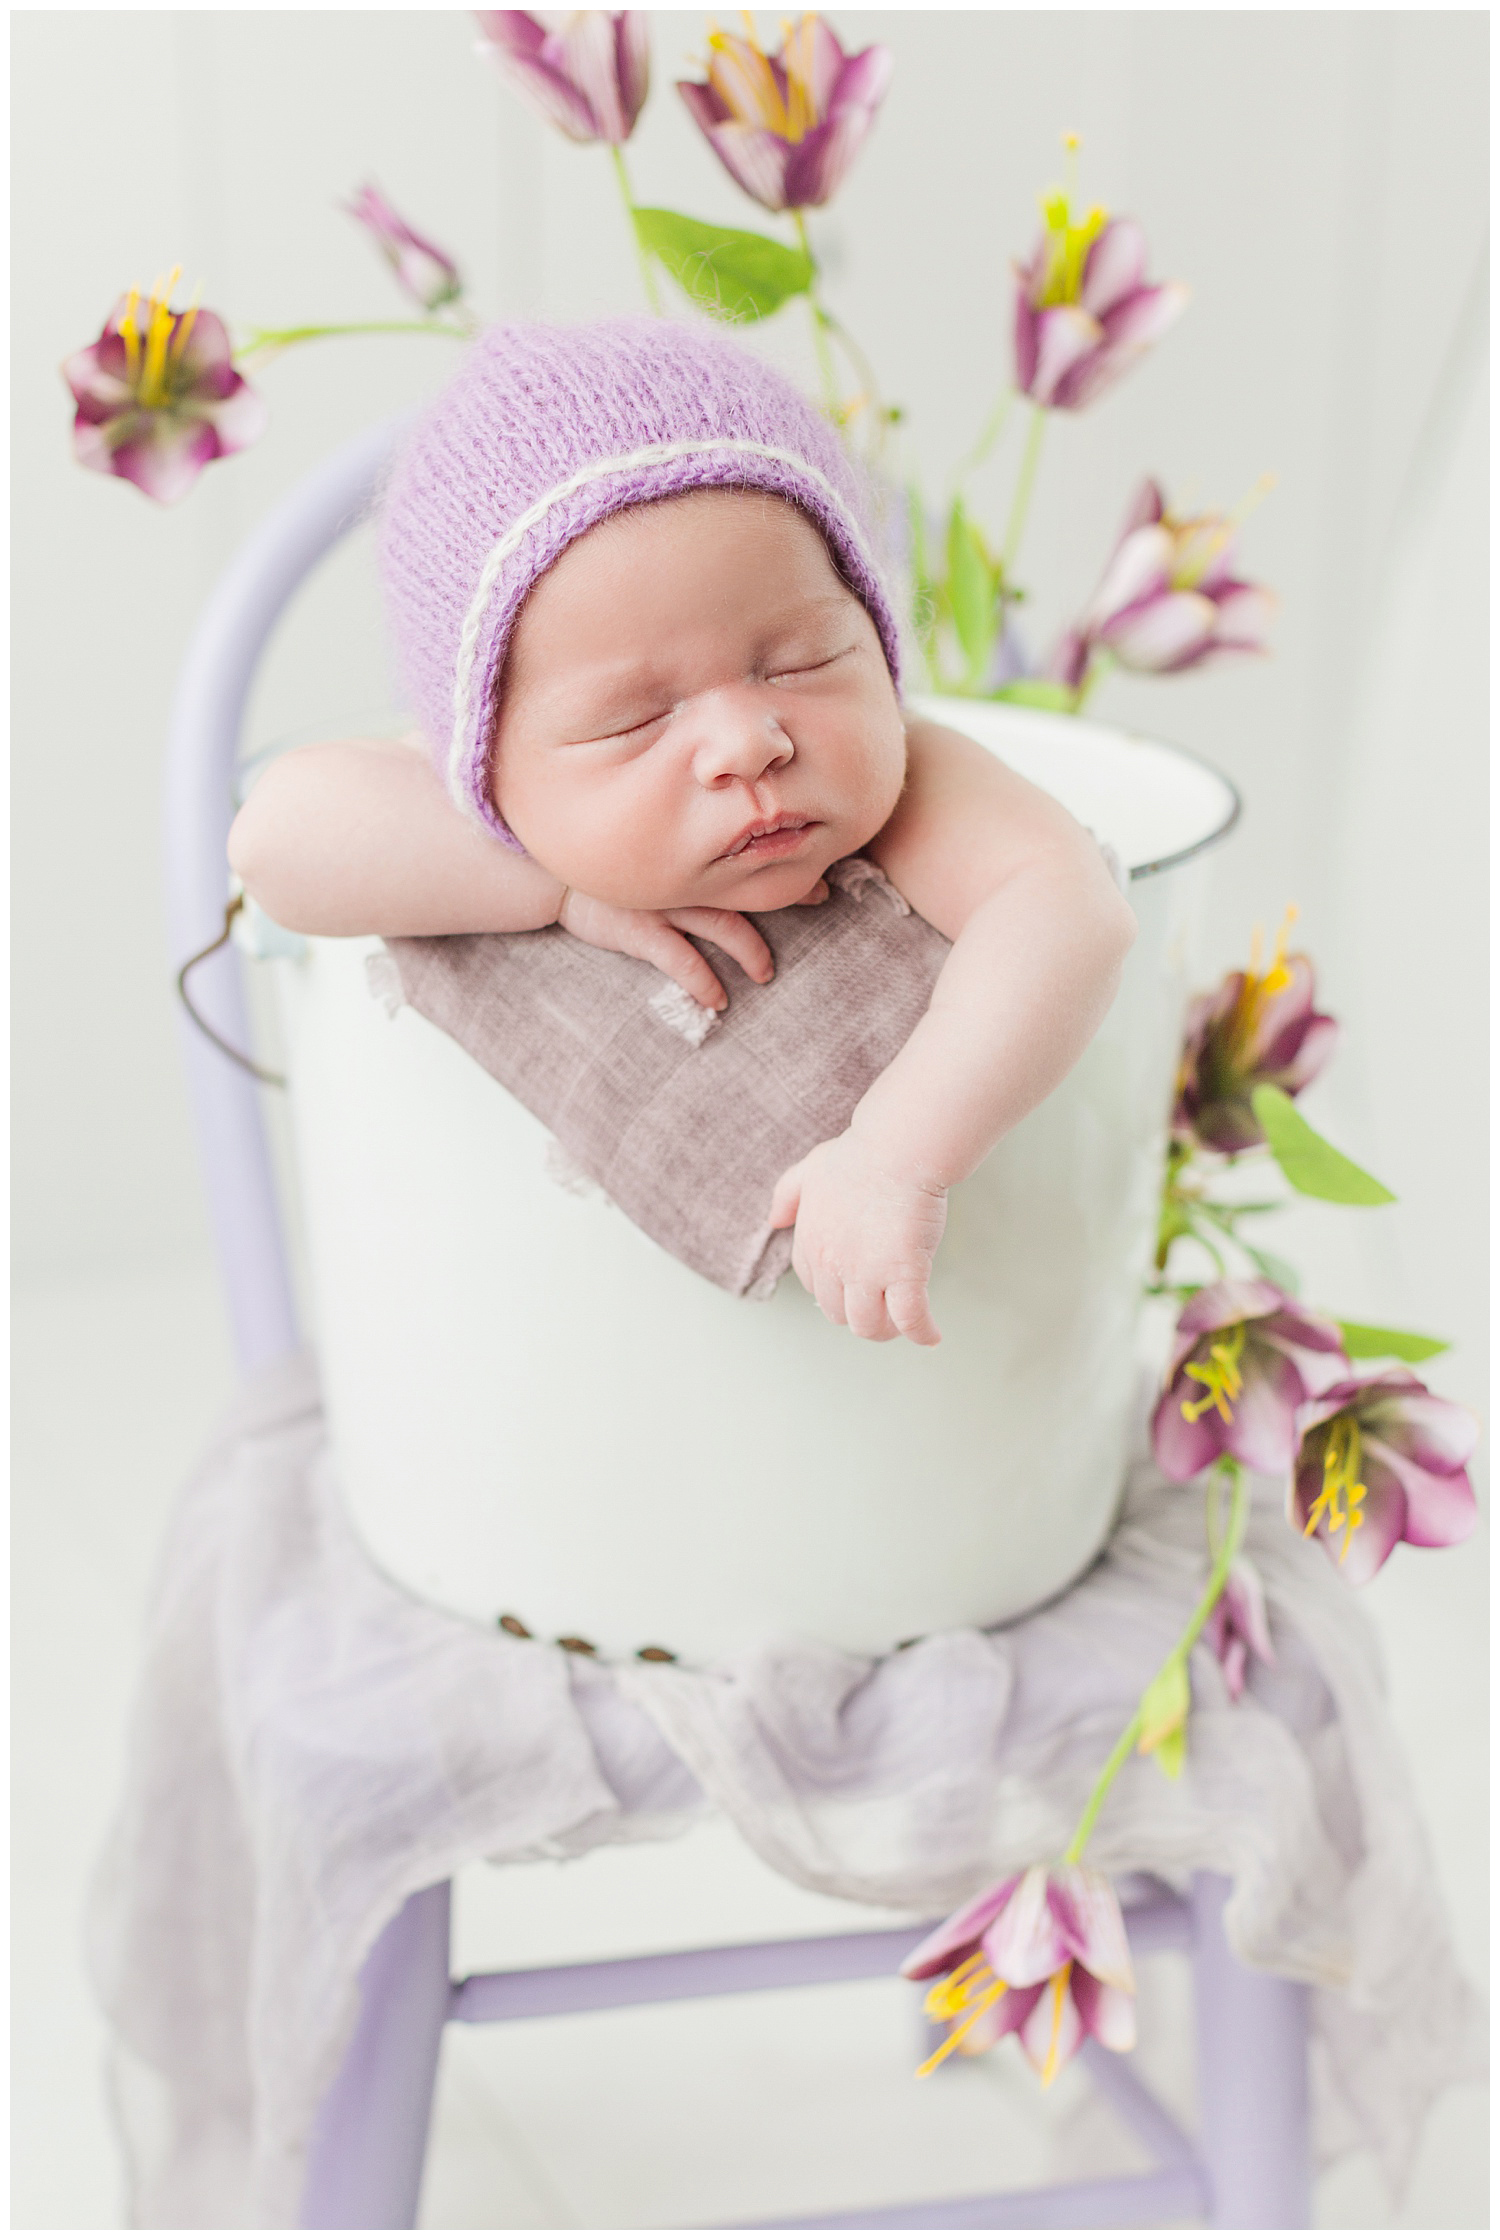 Baby Emma nestled in a bucket pose with purple florals surrounding her | CB Studio